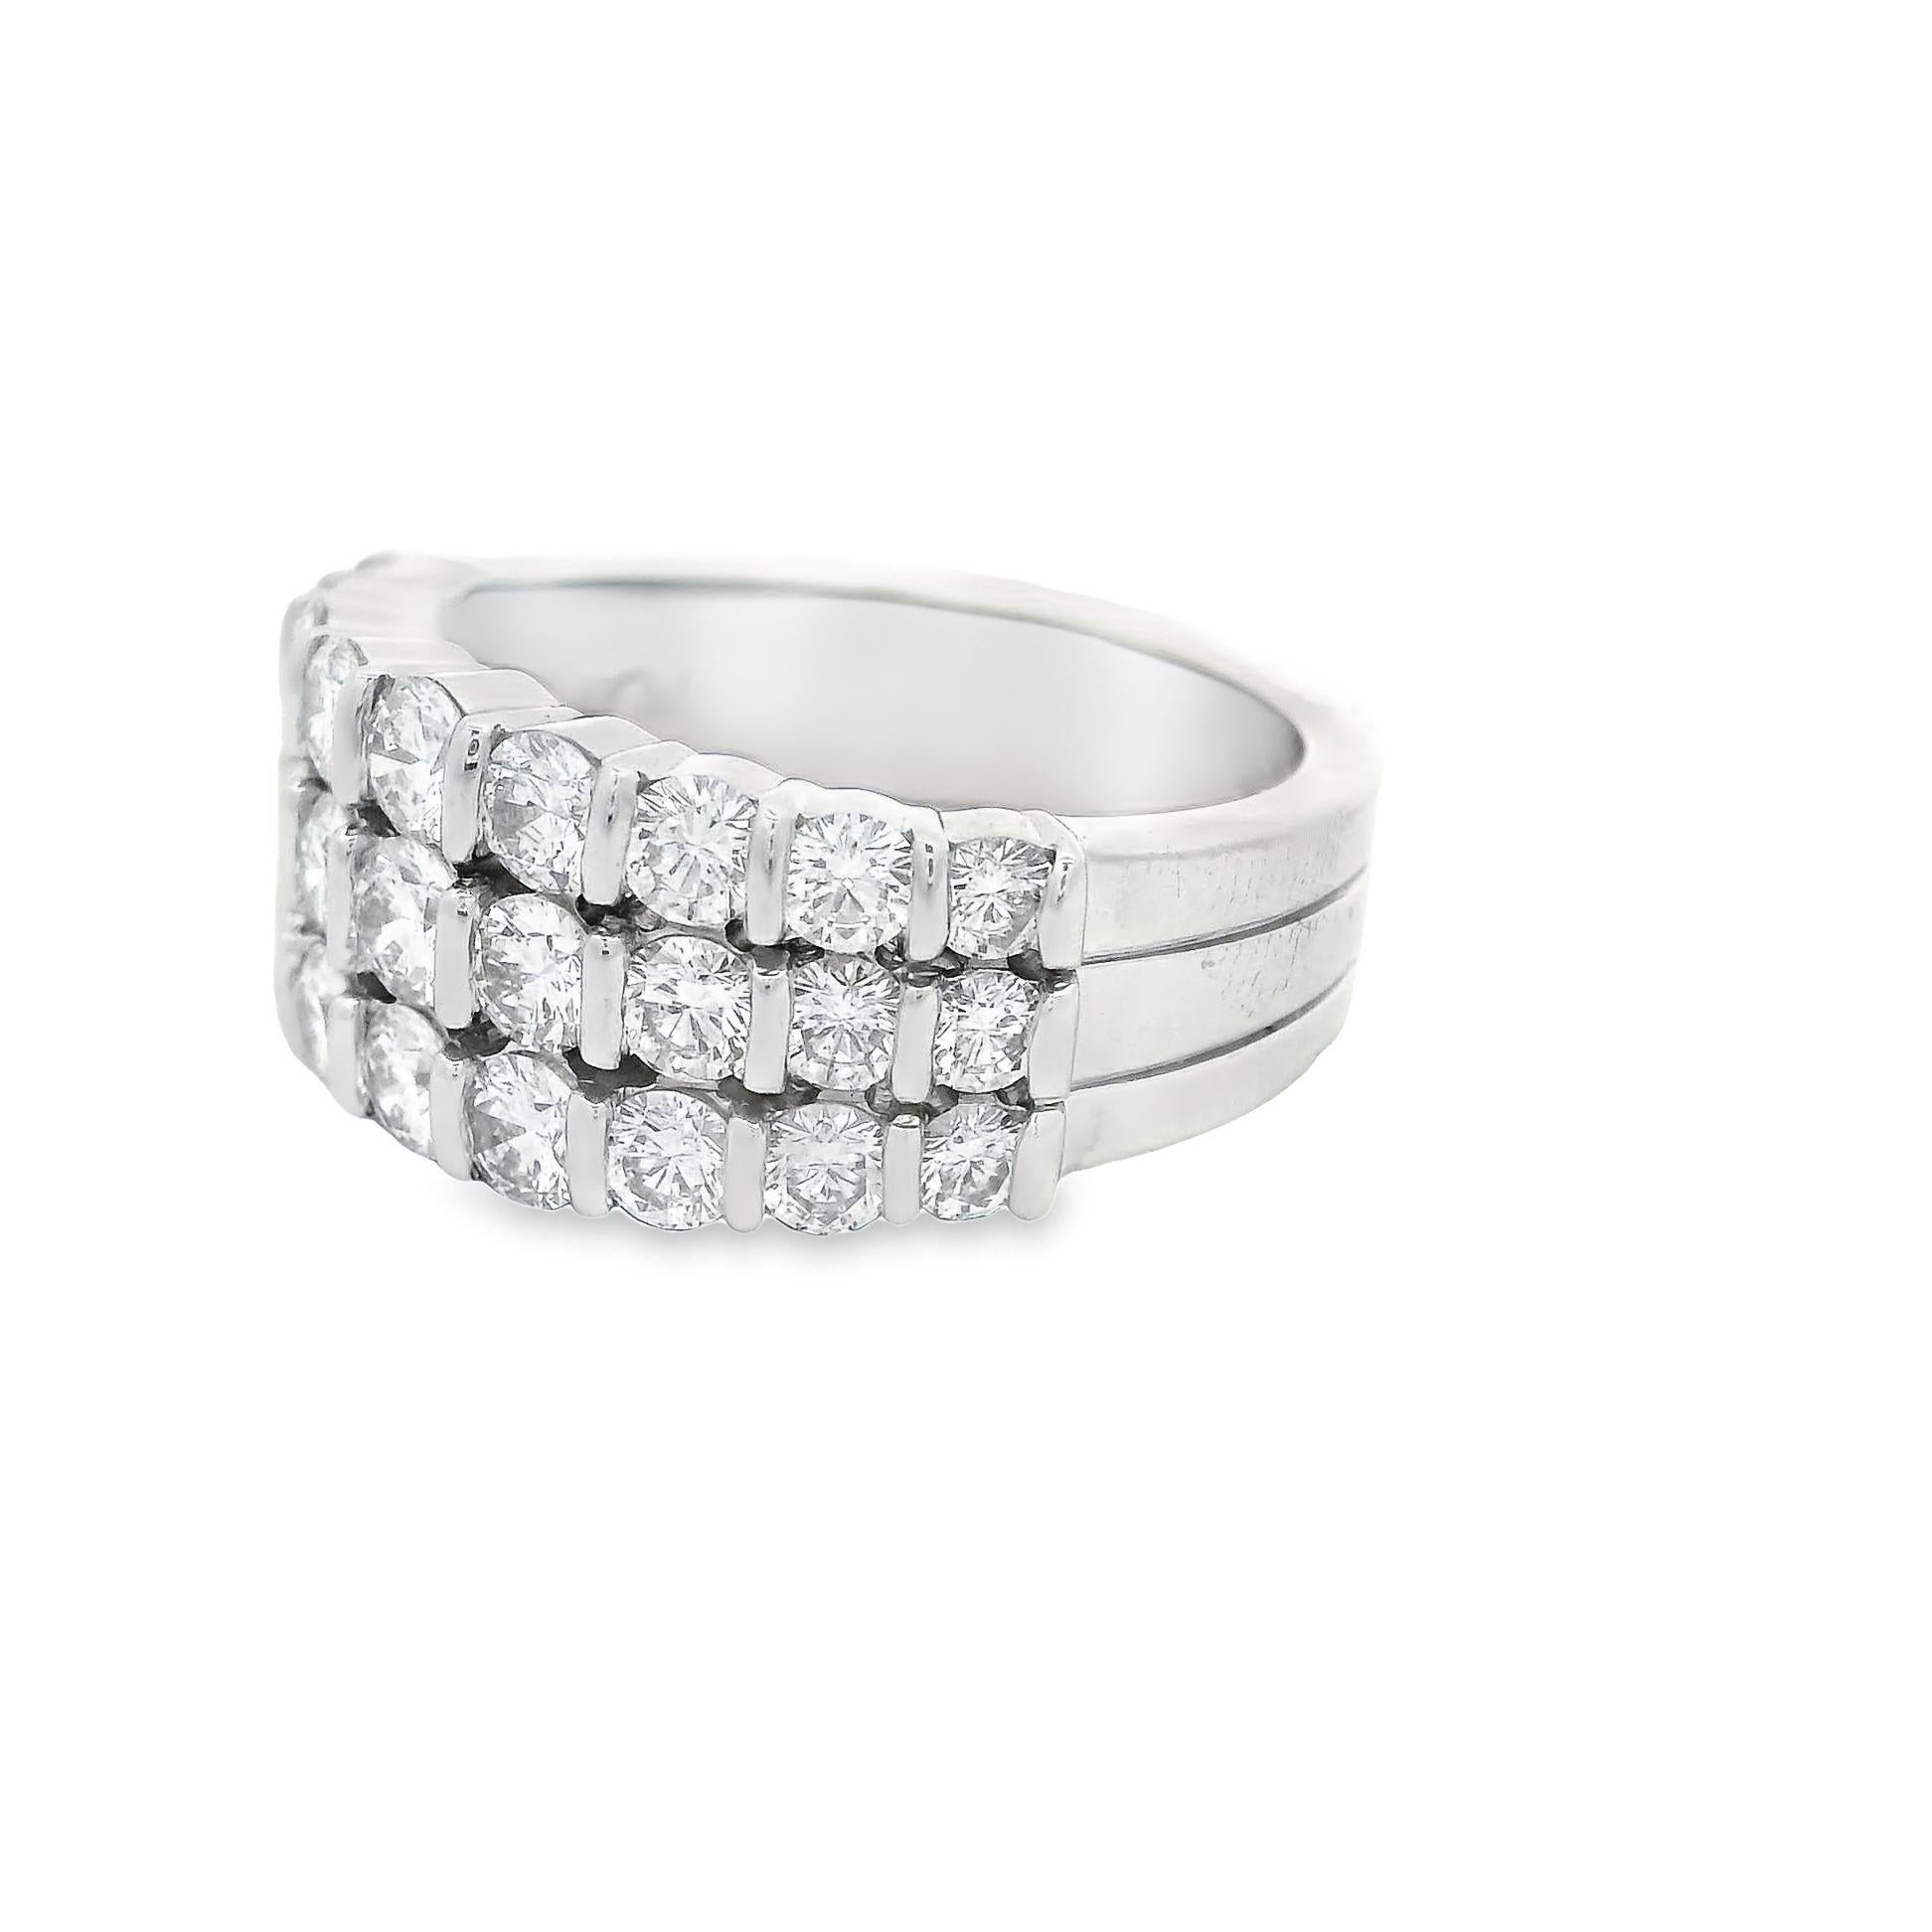 A lovely ring by designer Gemlok featuring 1.84 carats of round brilliant-cut diamonds. Threads of three rows of sparkling diamonds bring graceful minimalism and elegance to a shimmering ring crafted from platinum. There are a total of 27 diamonds